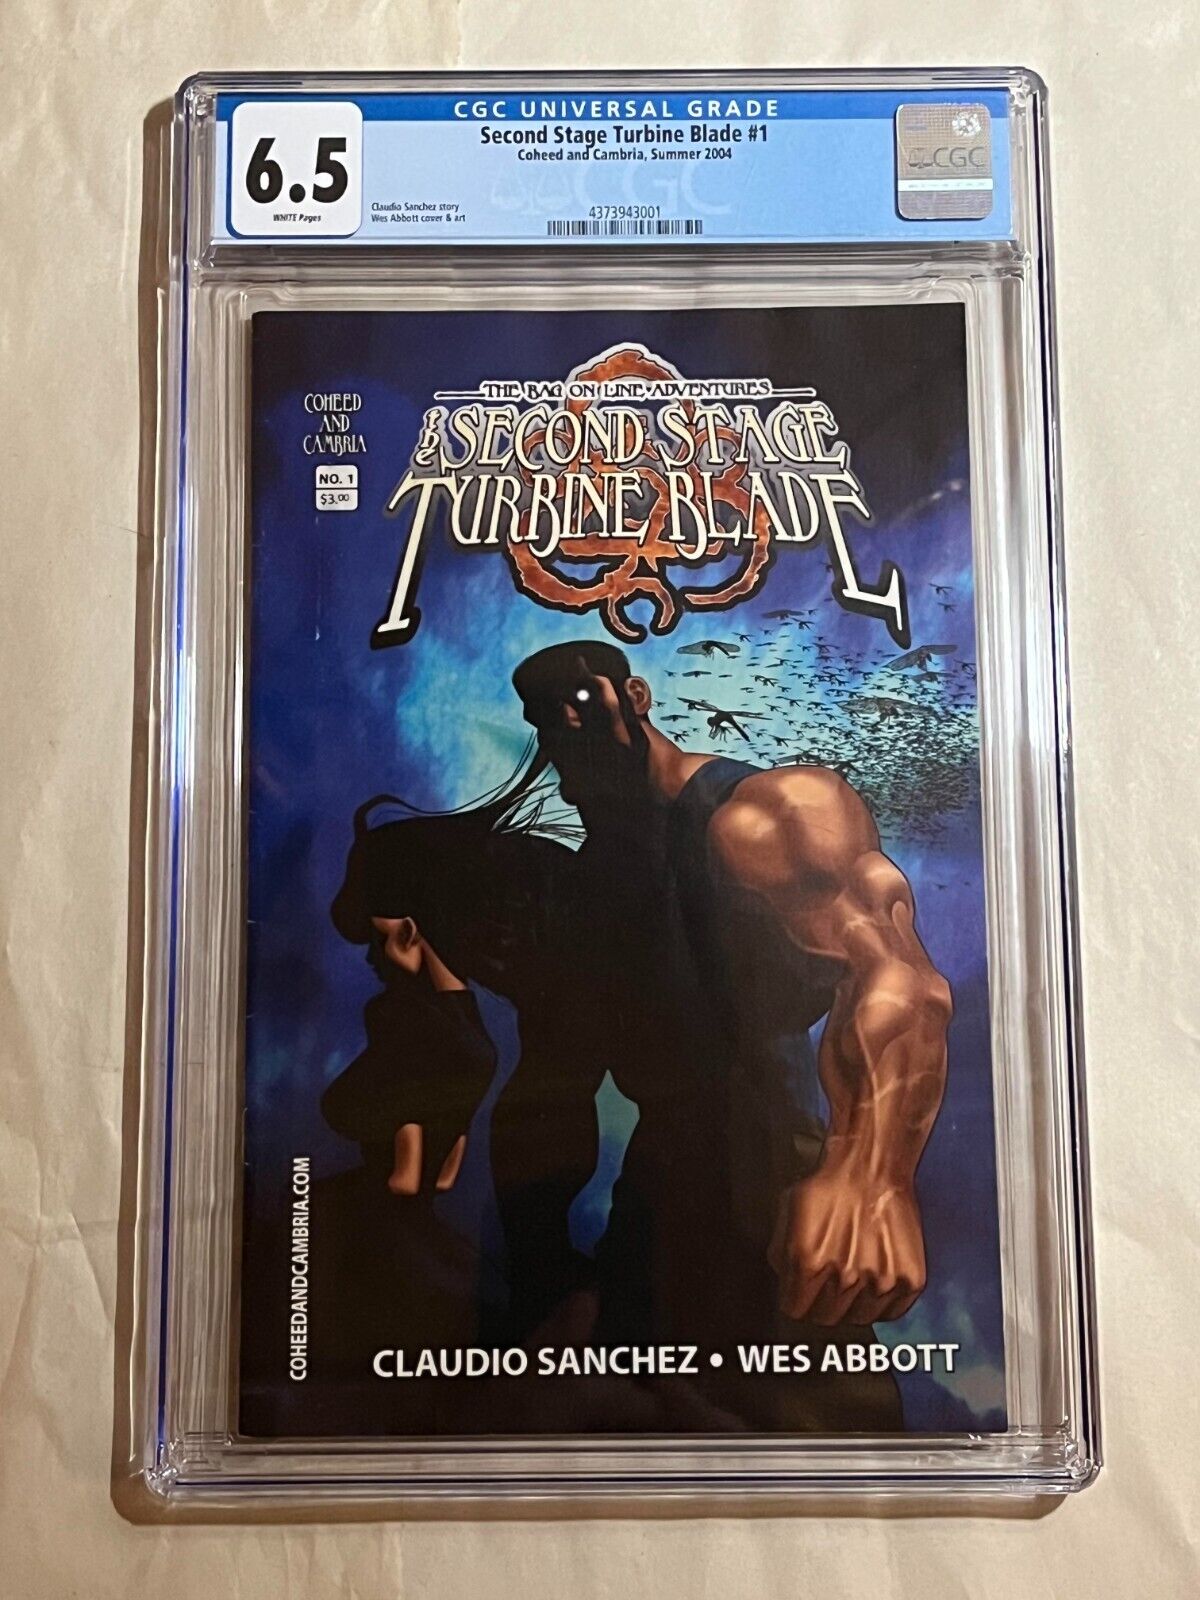 RARE 1st Print Coheed and Cambria Second Stage Turbine Comic #1 CGC Graded 6.5